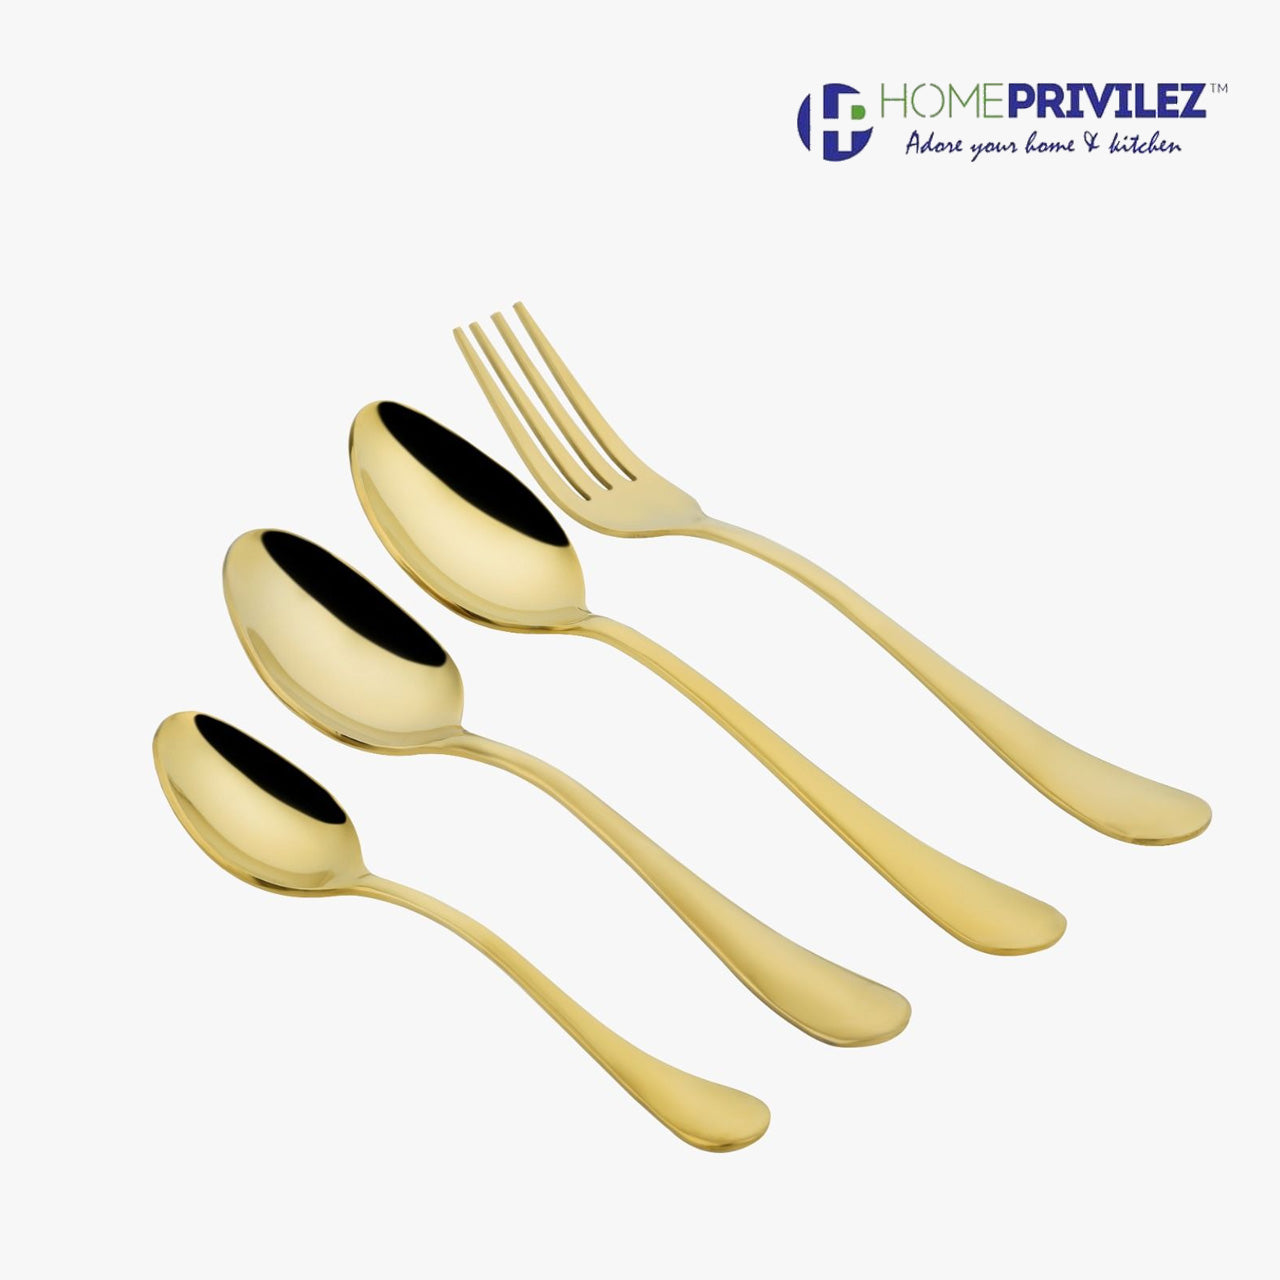 Aster Stainless Steel PVD gold cutlery set of 24 pcs in Stainless Steel stand with wooden base